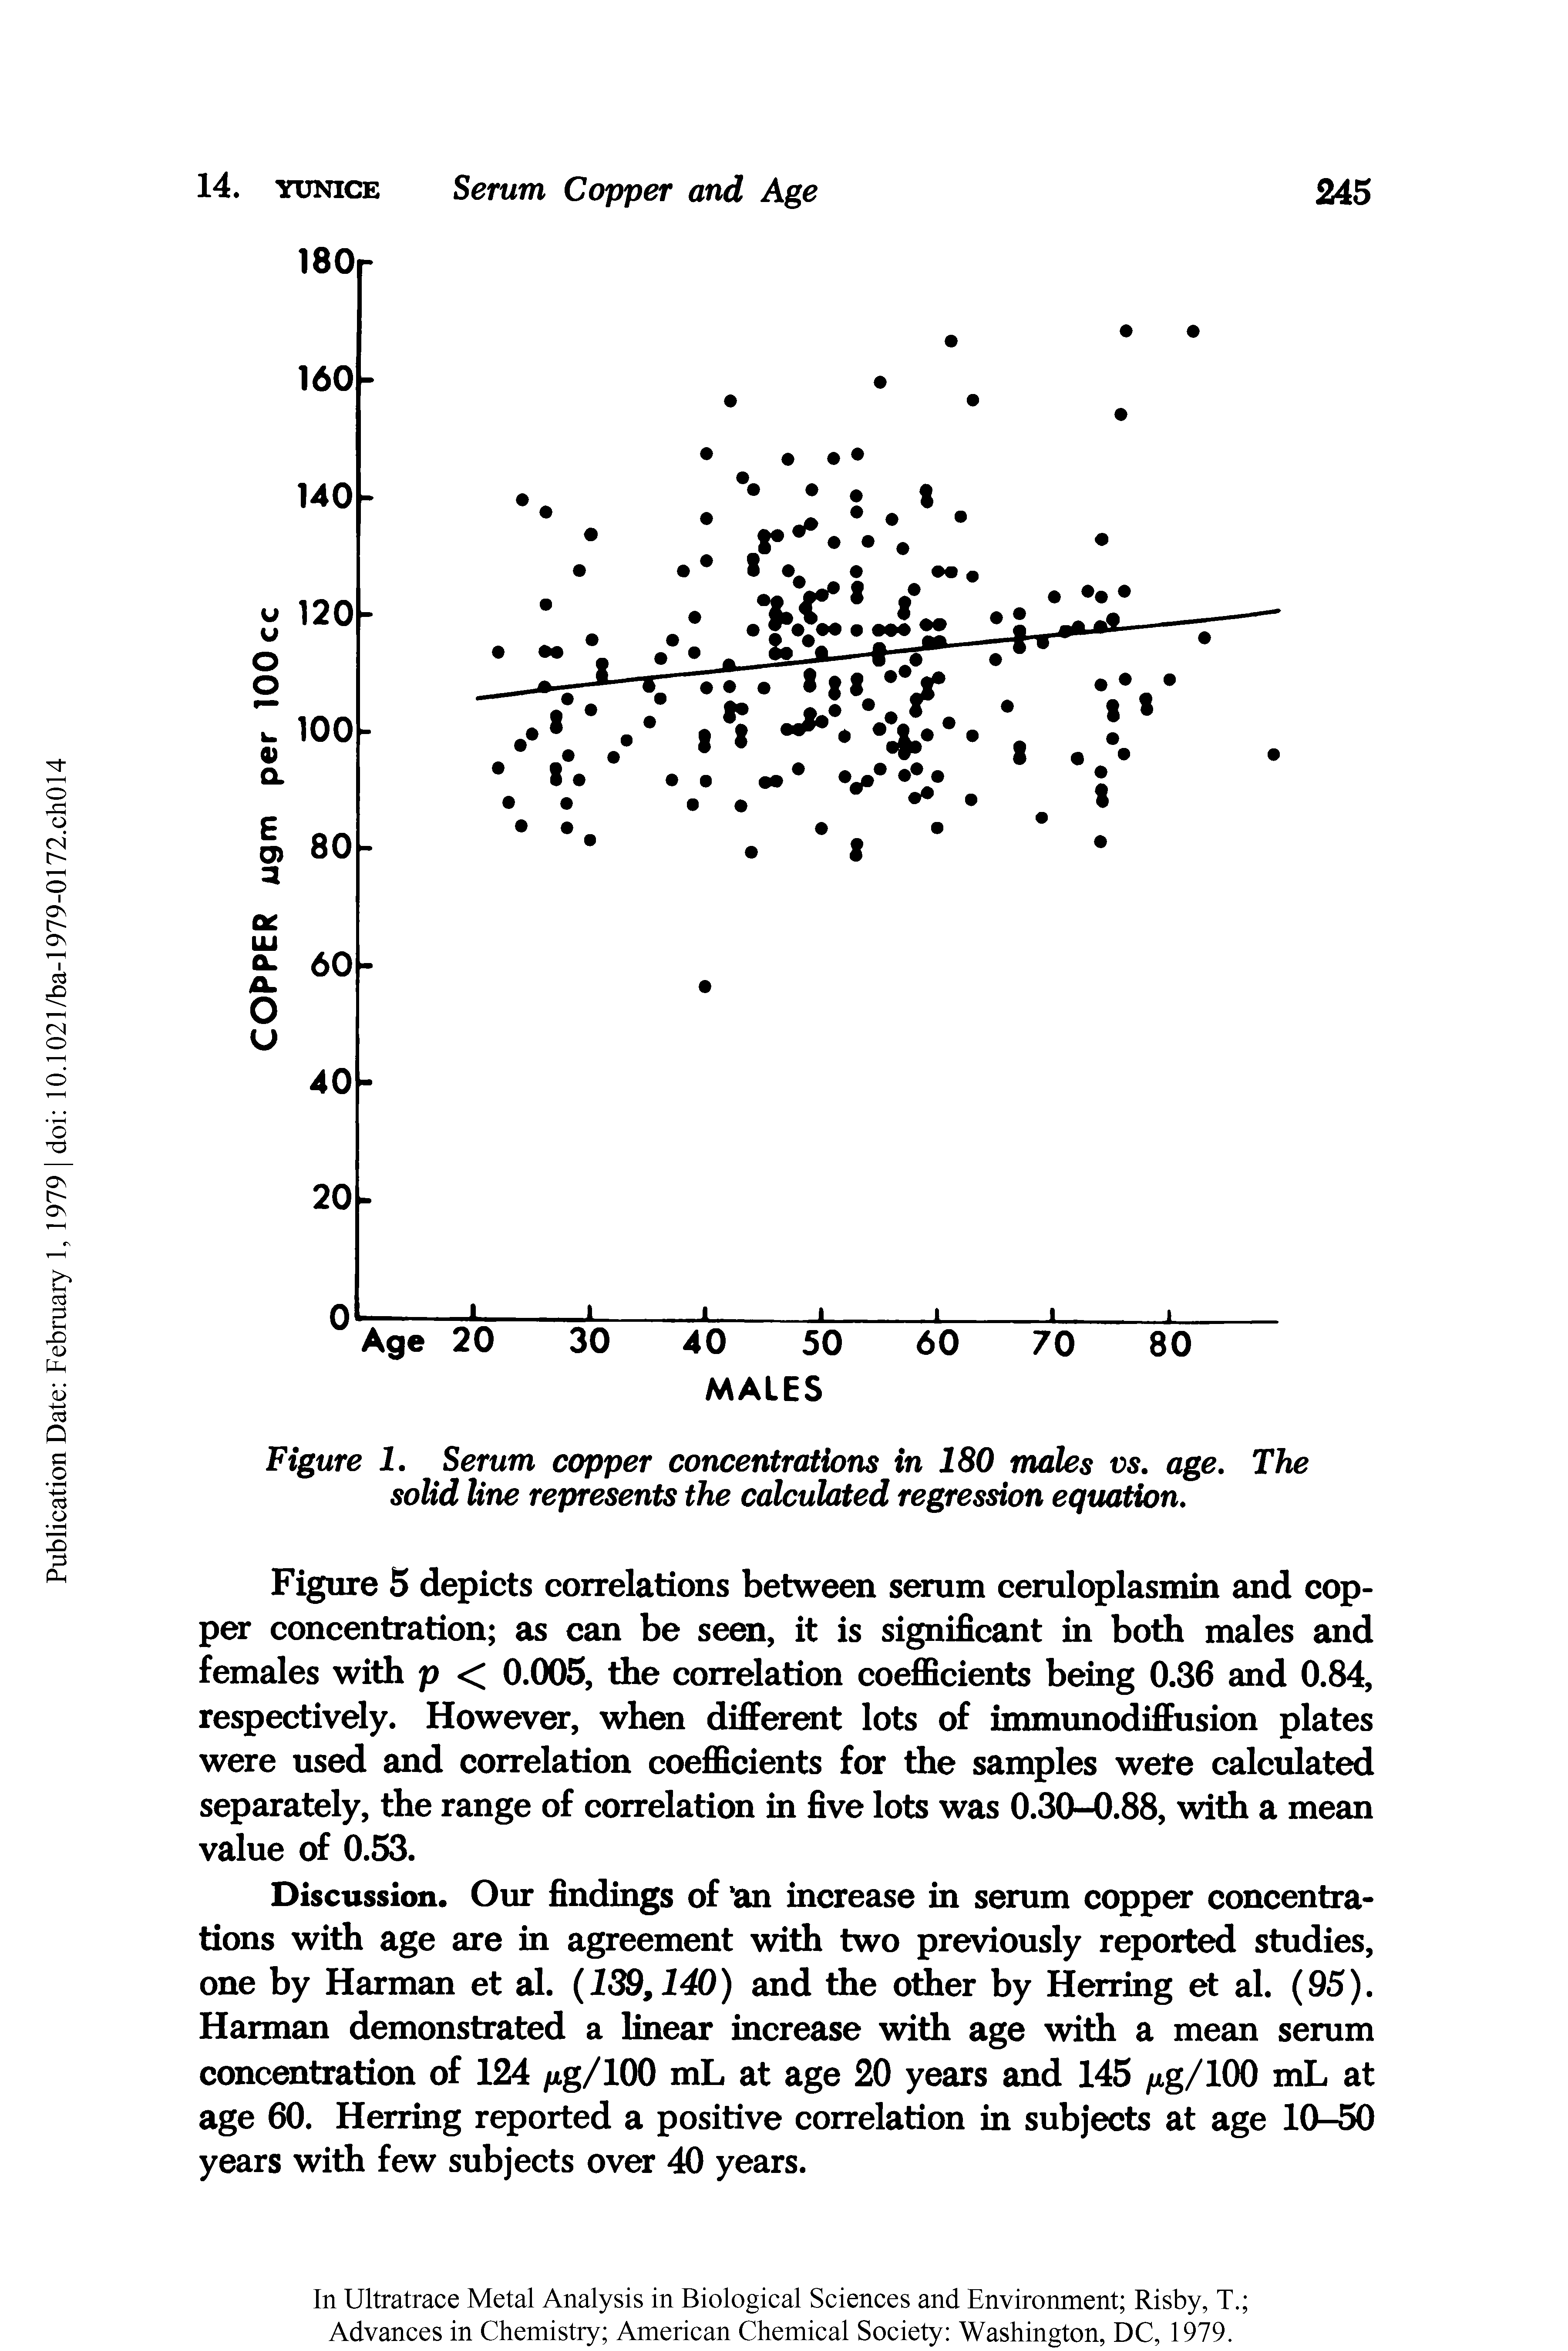 Figure 1. Serum copper concentrations in 180 males vs. age. solid line represents the calculated regression equation.